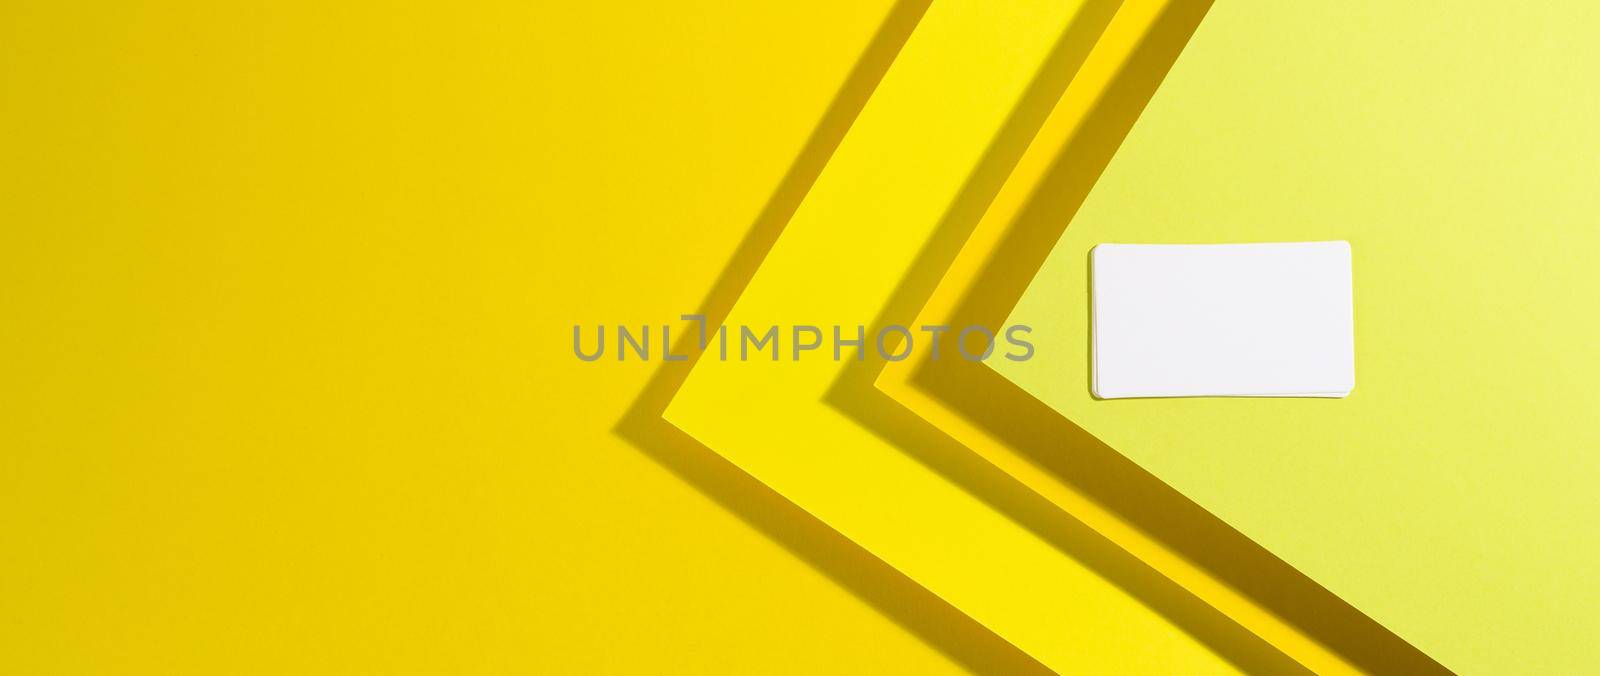 blank white rectangular business card on creative yellow background from sheets of paper with shadow, top view, copy space